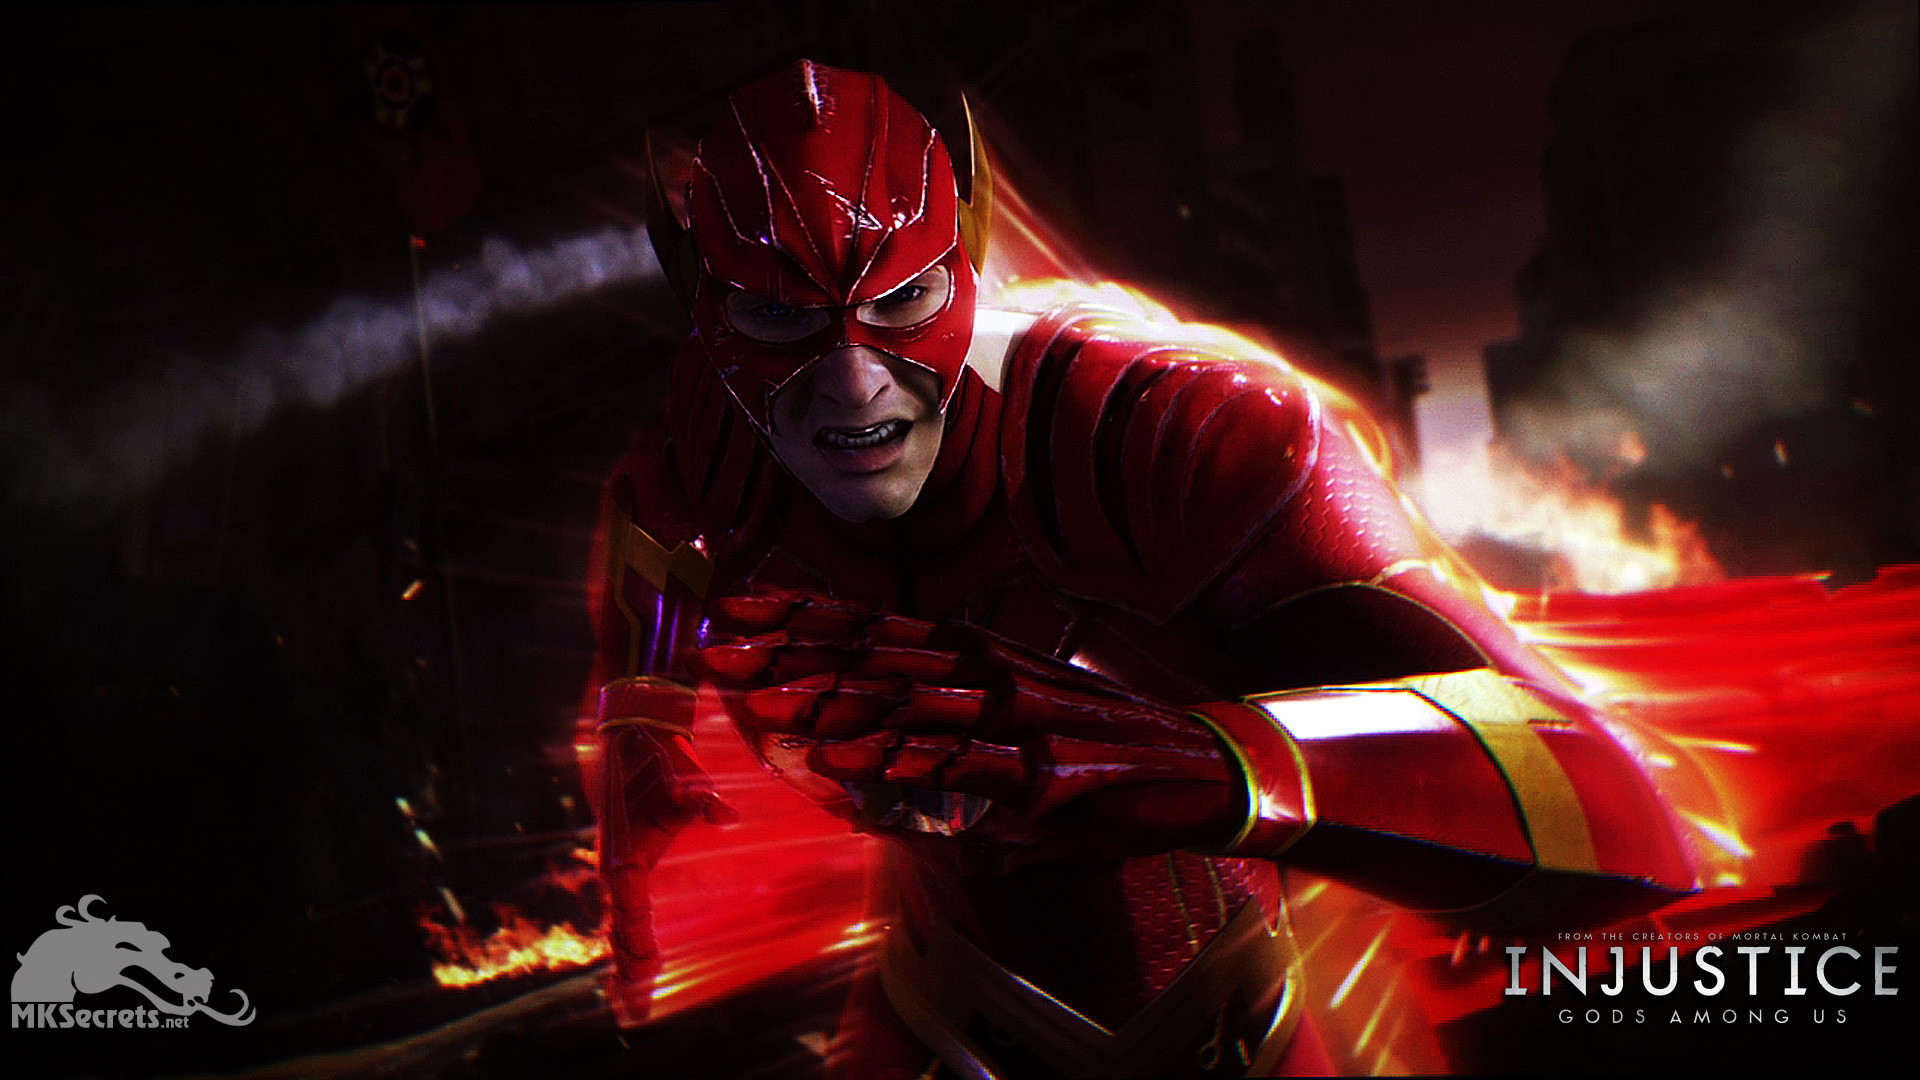 1920x1080 ... Injustice: Gods Among Us - The Flash Wallpaper ...